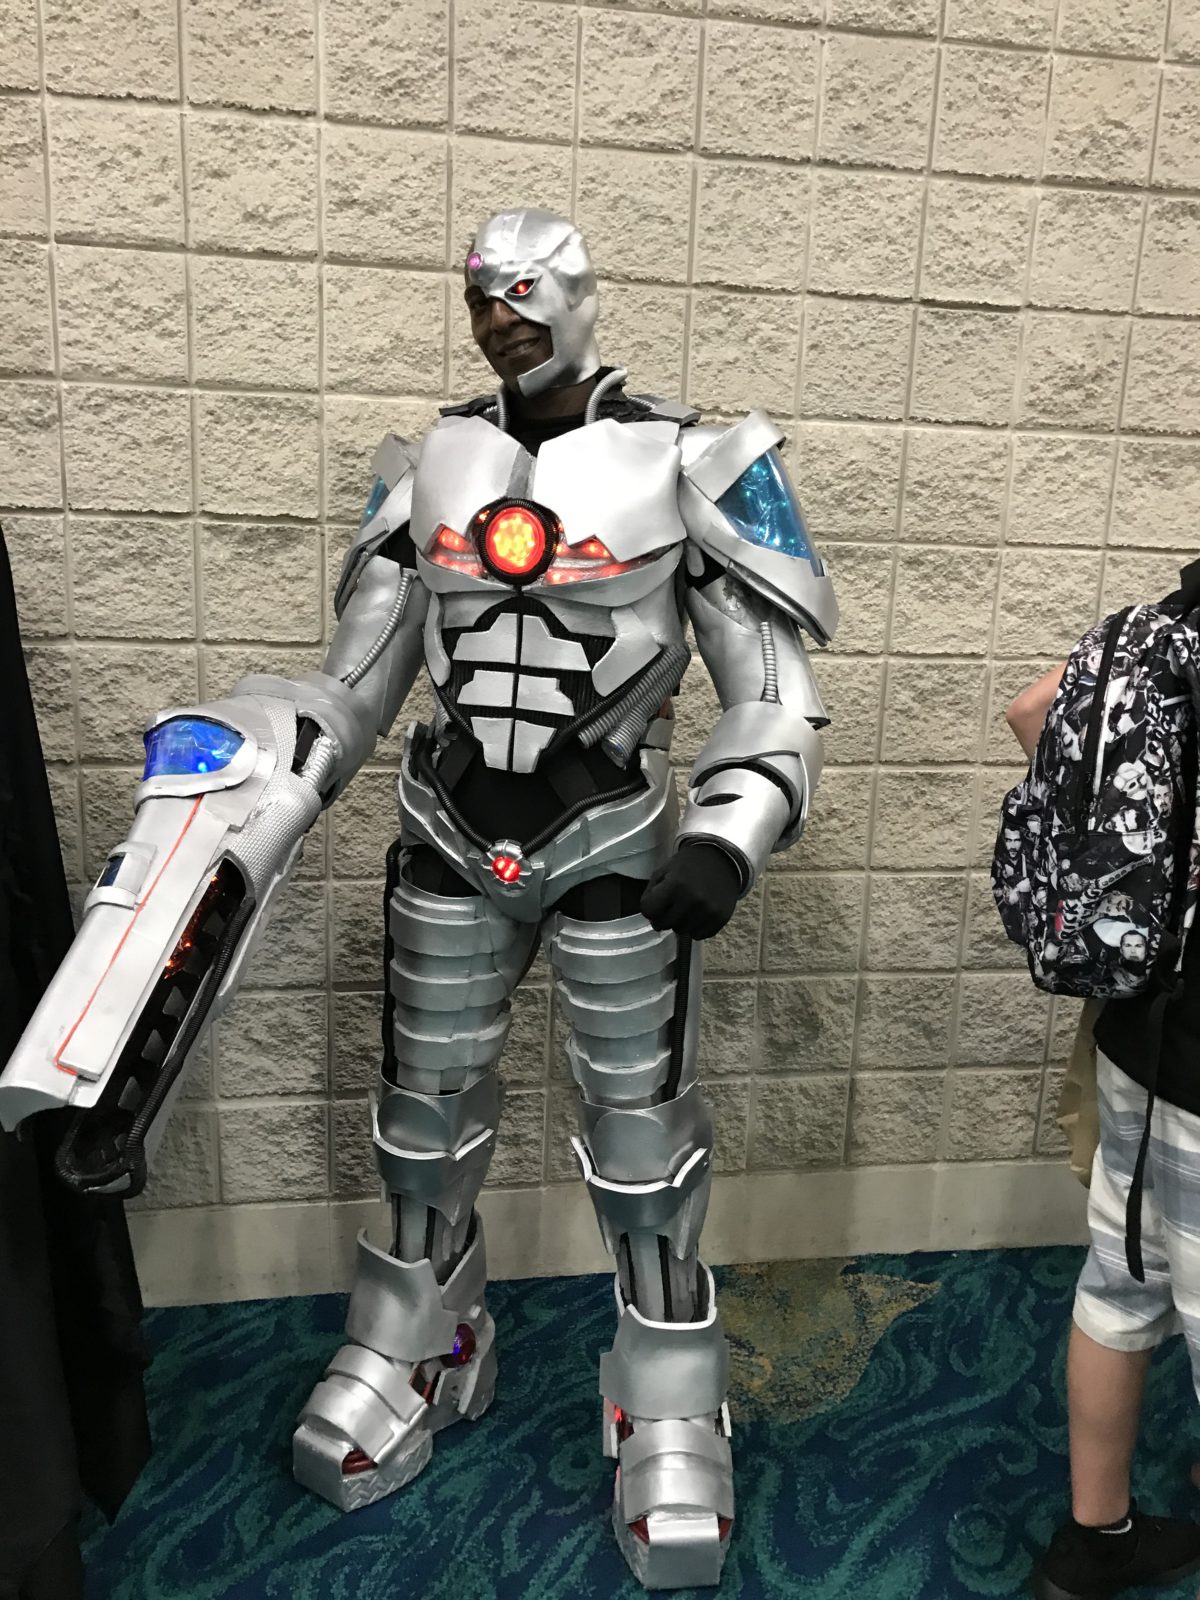 SUPER CosViews from Fort Lauderdale SUPERCON:  CYBORG blasted into SUPERCON